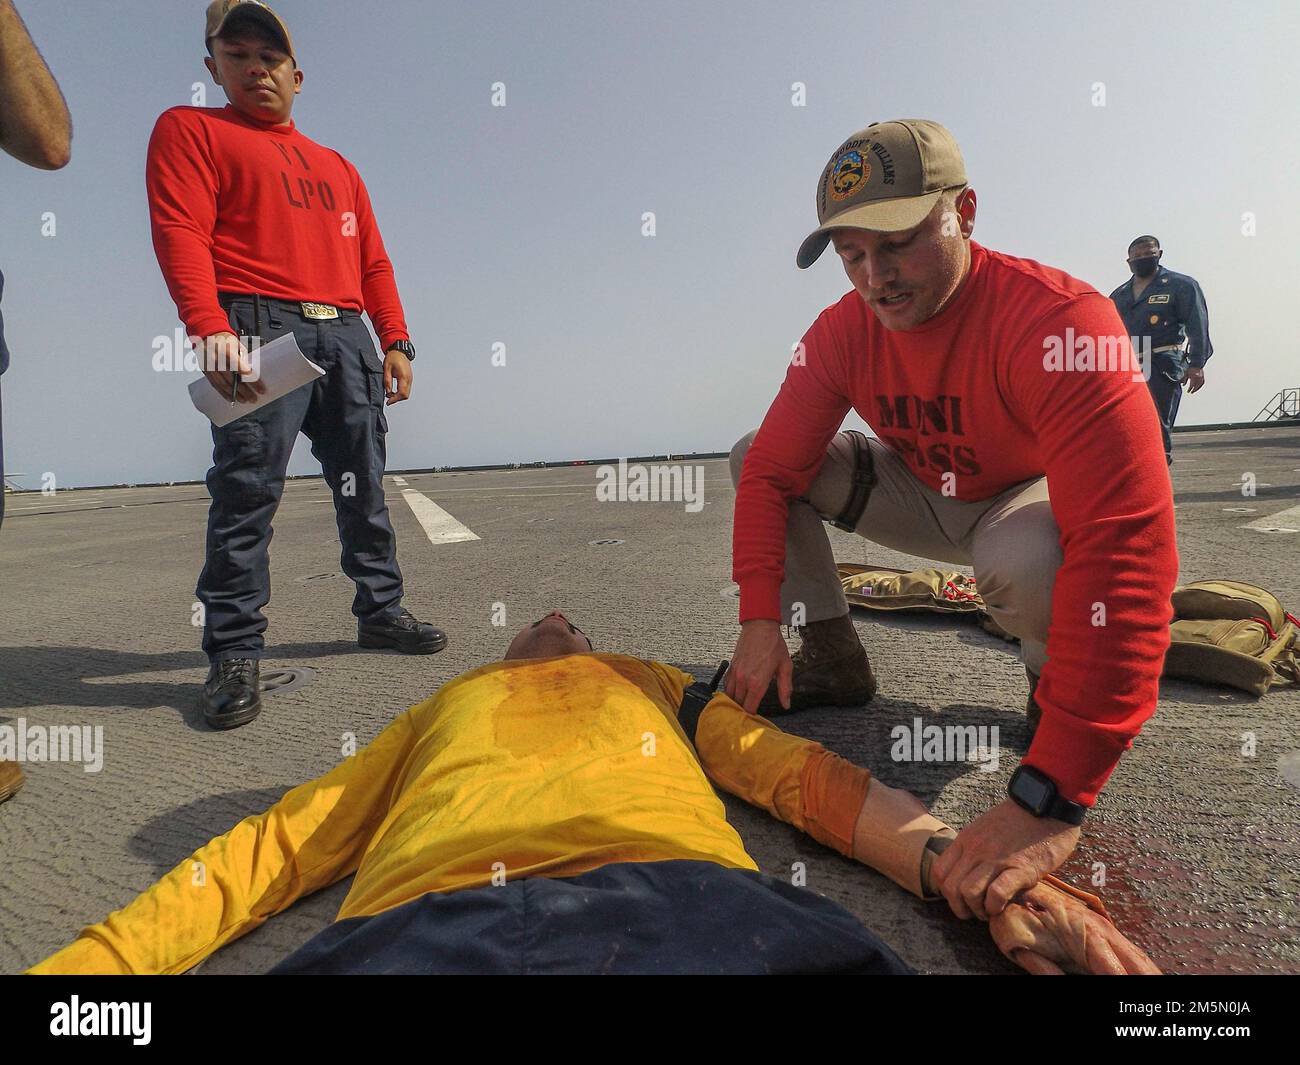 220328-N-TI693-1091    ATLANTIC OCEAN (March 28, 2022) - Lt. j.g. Kyler Smith, assistant operations officer, right, provides emergency care on a simulated injury during a mass casualty drill aboard the Expeditionary Sea Base USS Hershel 'Woody' Williams (ESB 4), March 28, 2022. Hershel 'Woody' Williams is on a scheduled deployment in the U.S. Sixth Fleet area of operations in support of U.S. national interests and security in Europe and Africa. Stock Photo